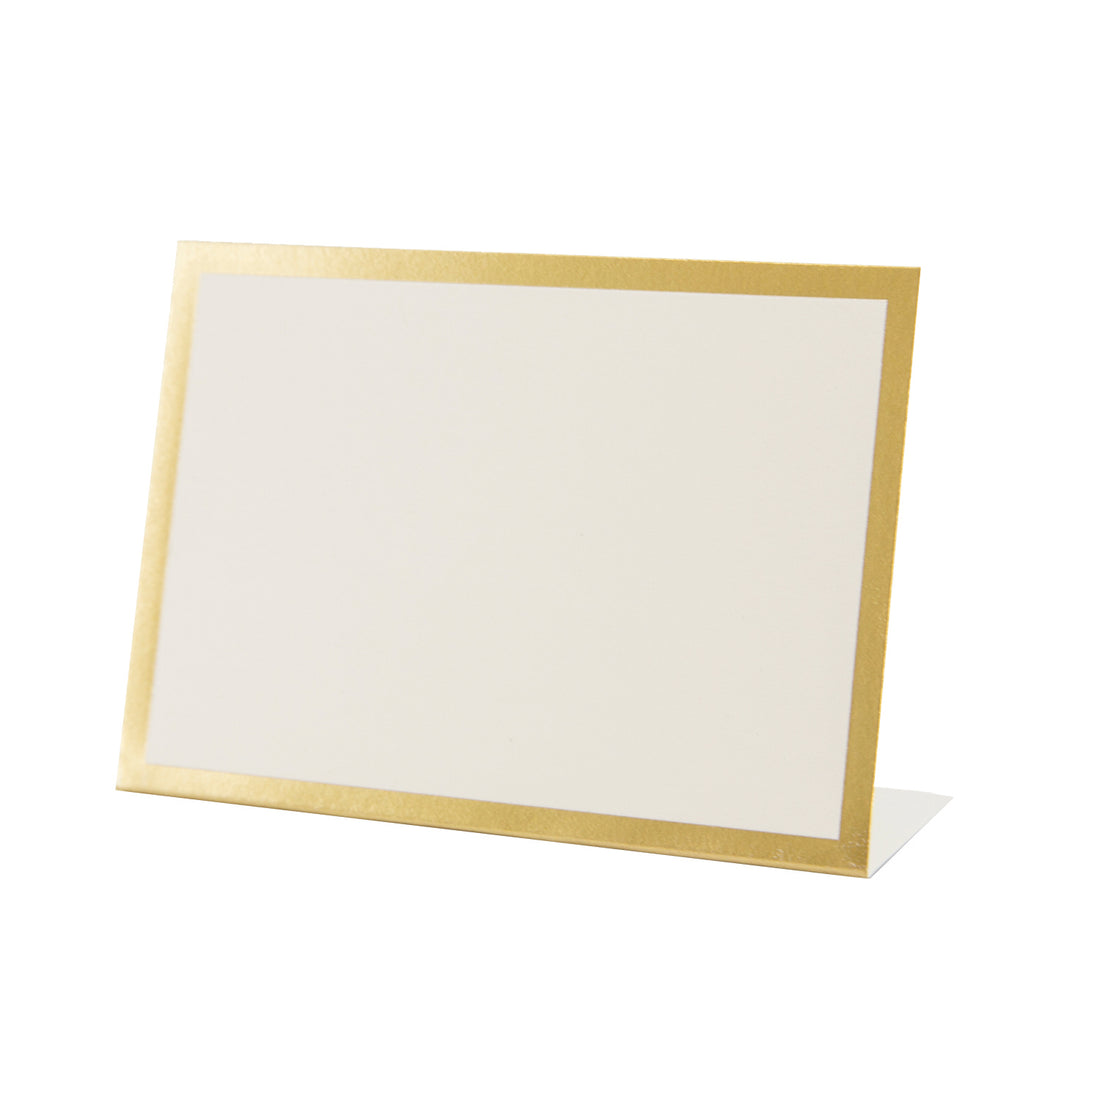 A free-standing, rectangular white table card with a simple gold foil frame around the edges.